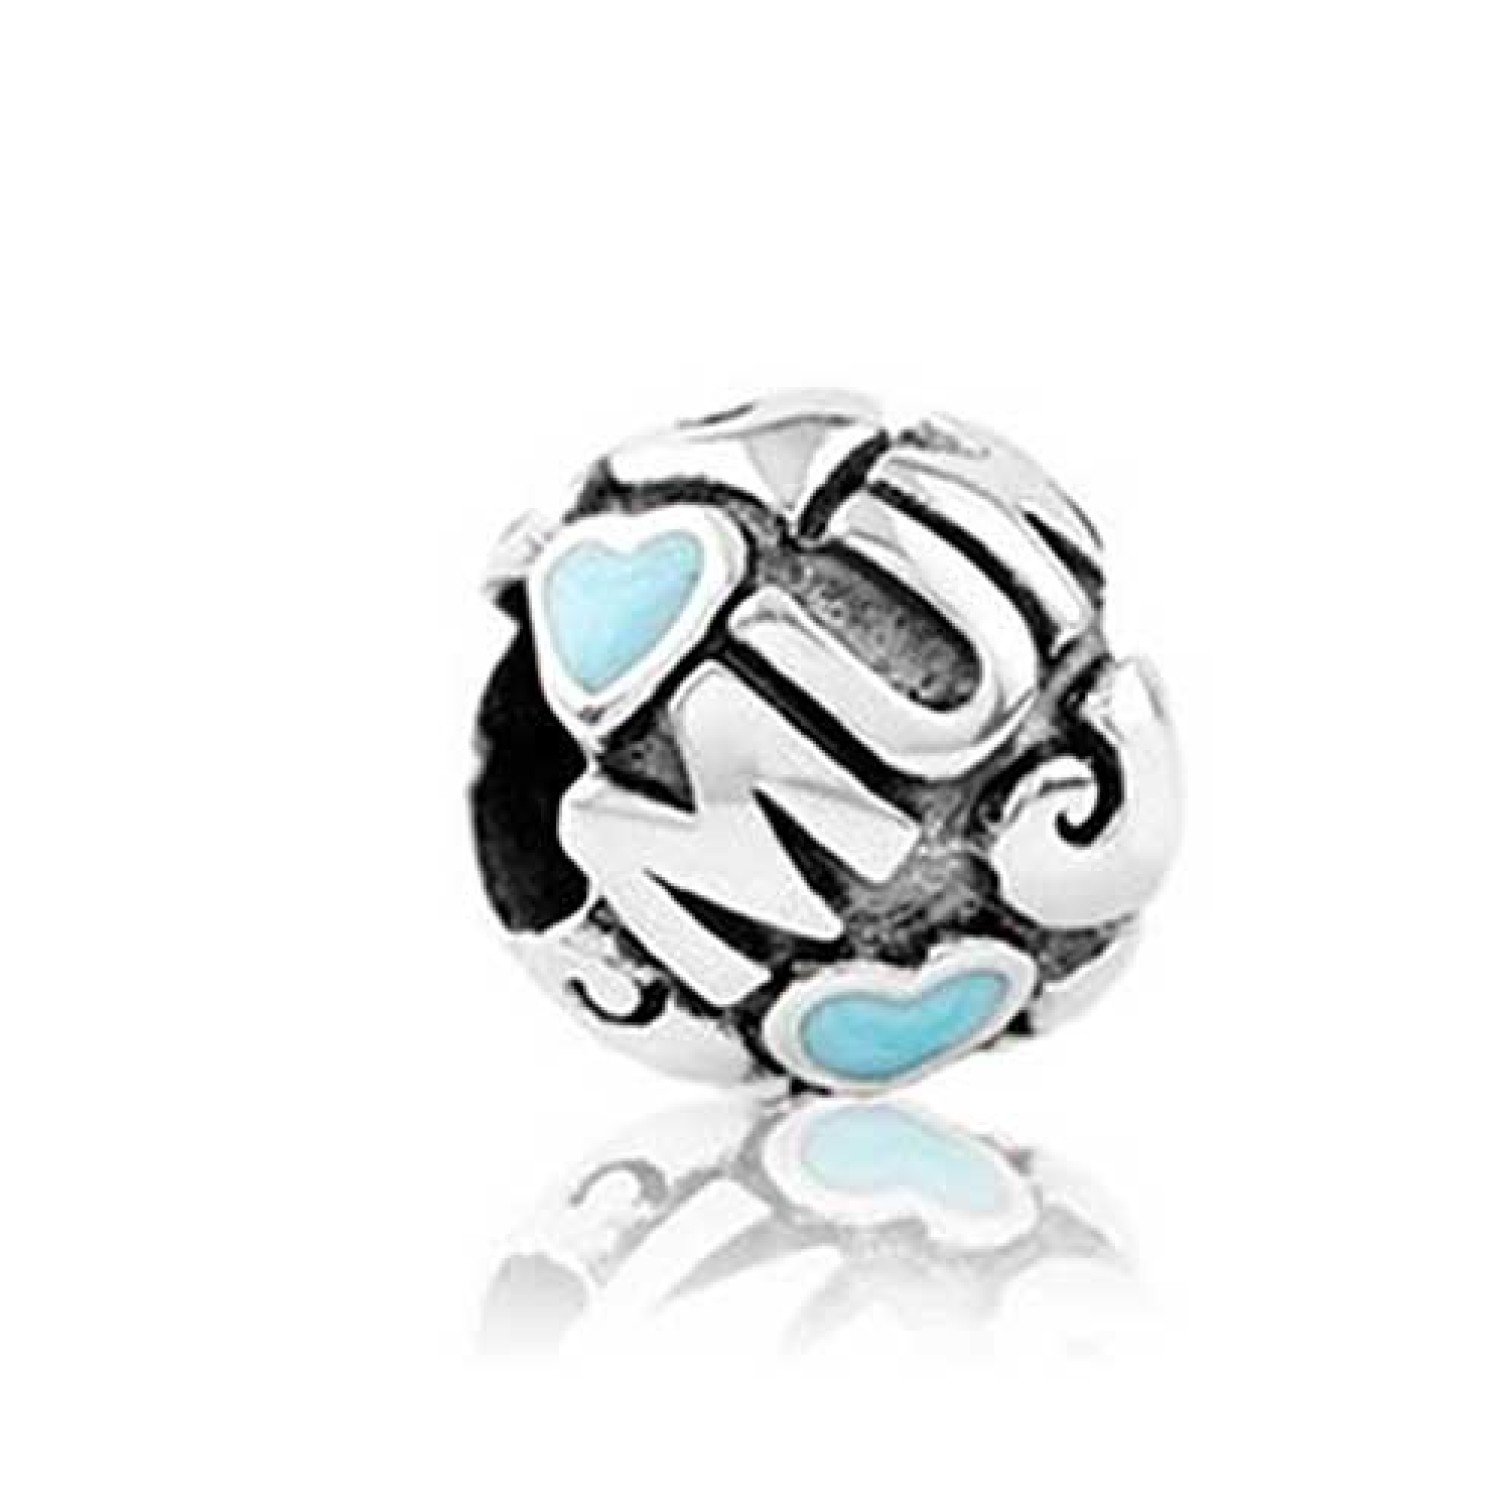 Evolve Charms Kiwi Mum Silver - LKE026. This beautiful charm celebrates the unconditional love and support that a mother shares with her precious family. Kiwi Mum” encircles a cluster of Aotearoa’s Hearts and soft blue enamel hearts.  Kiwi mothers c @chri